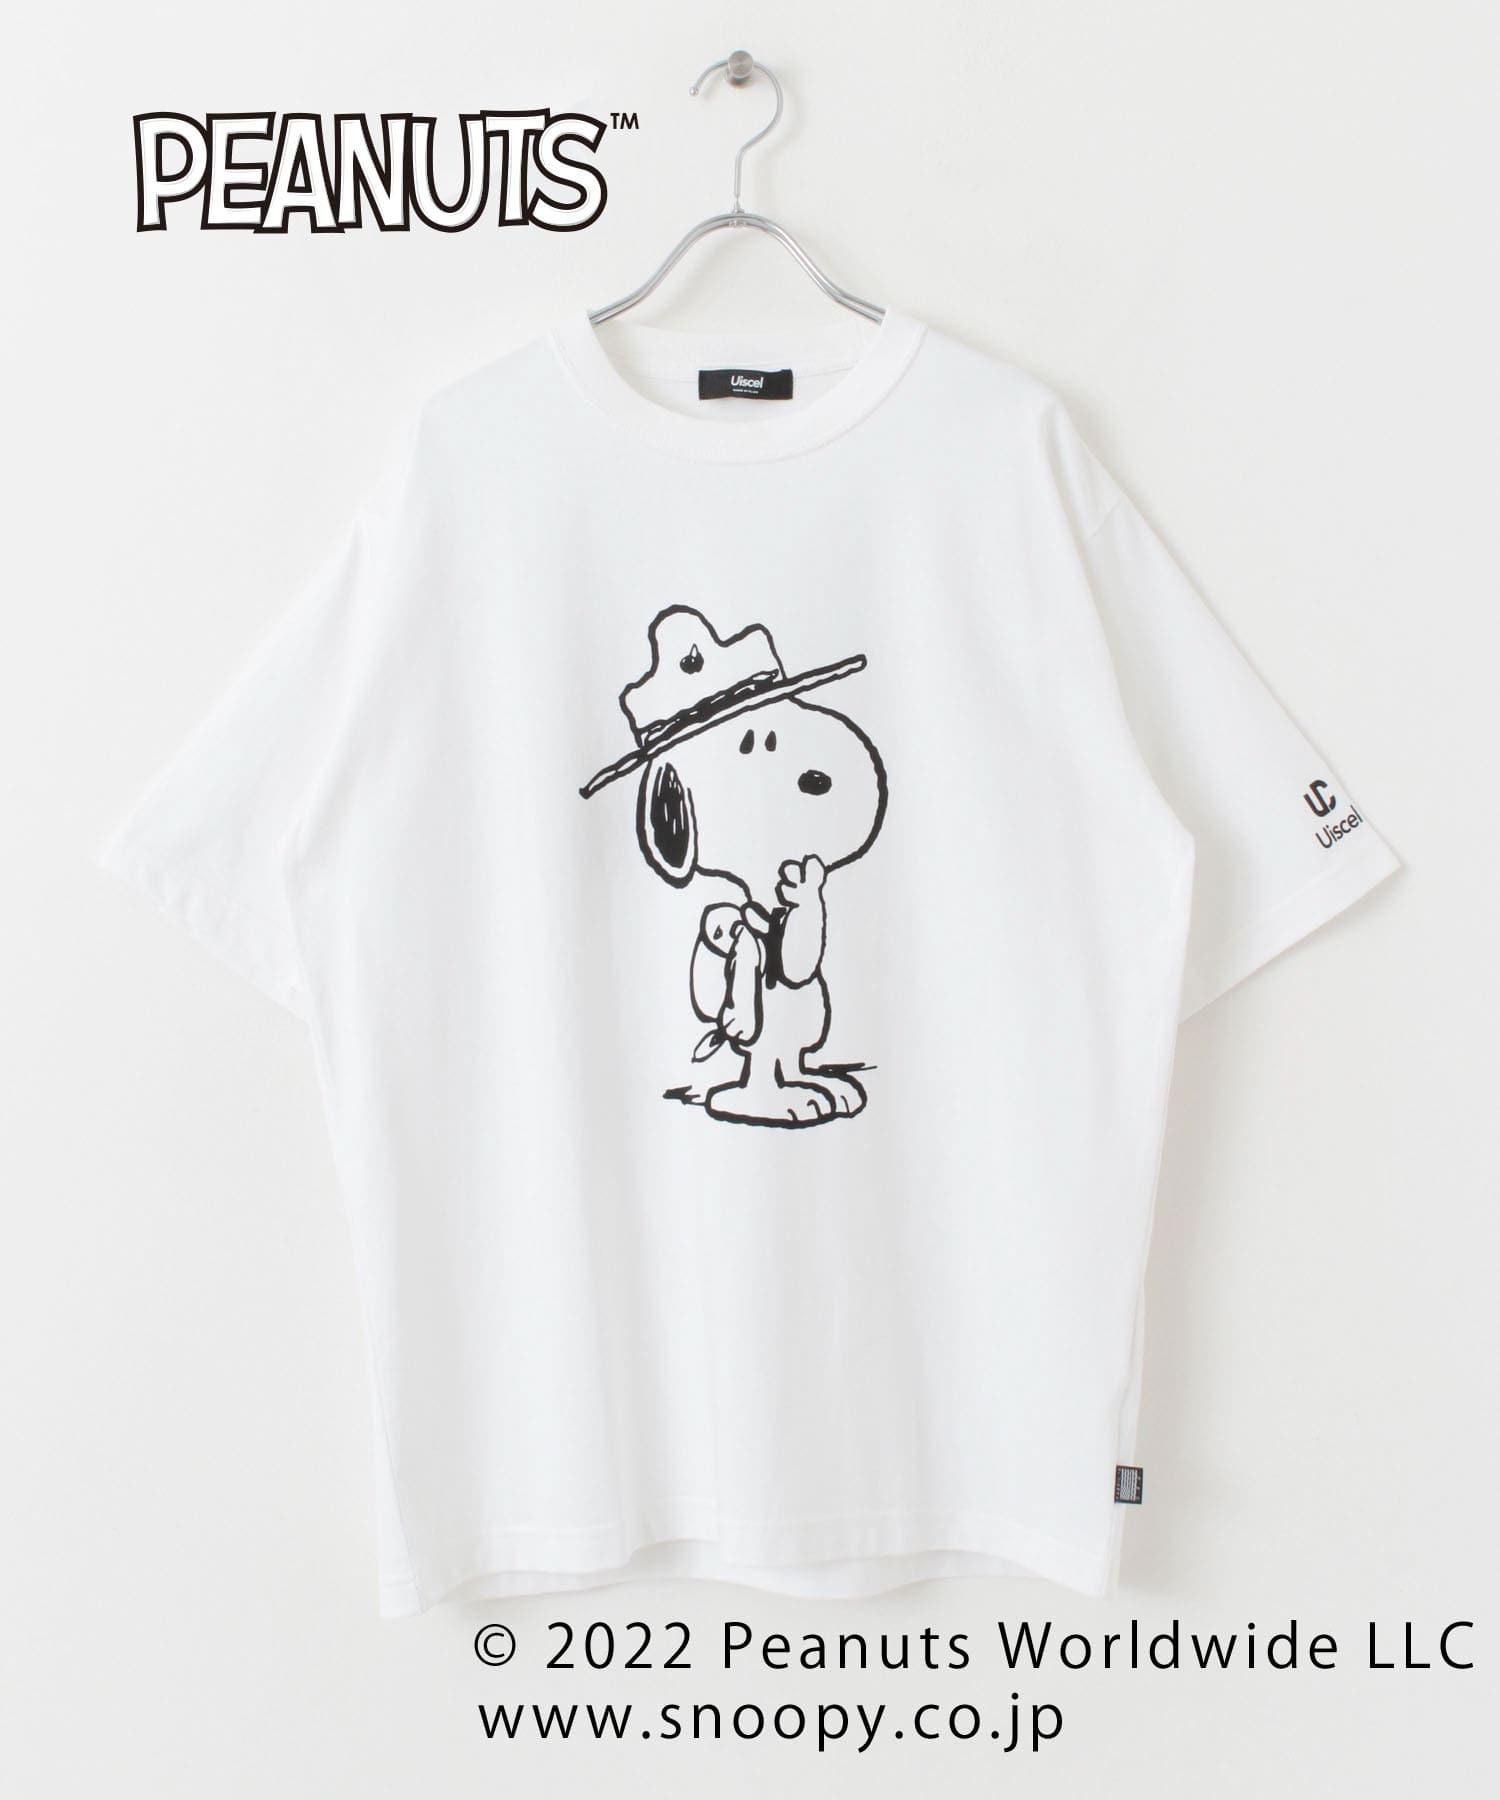 SNOOPY x Uiscel T恤 A款